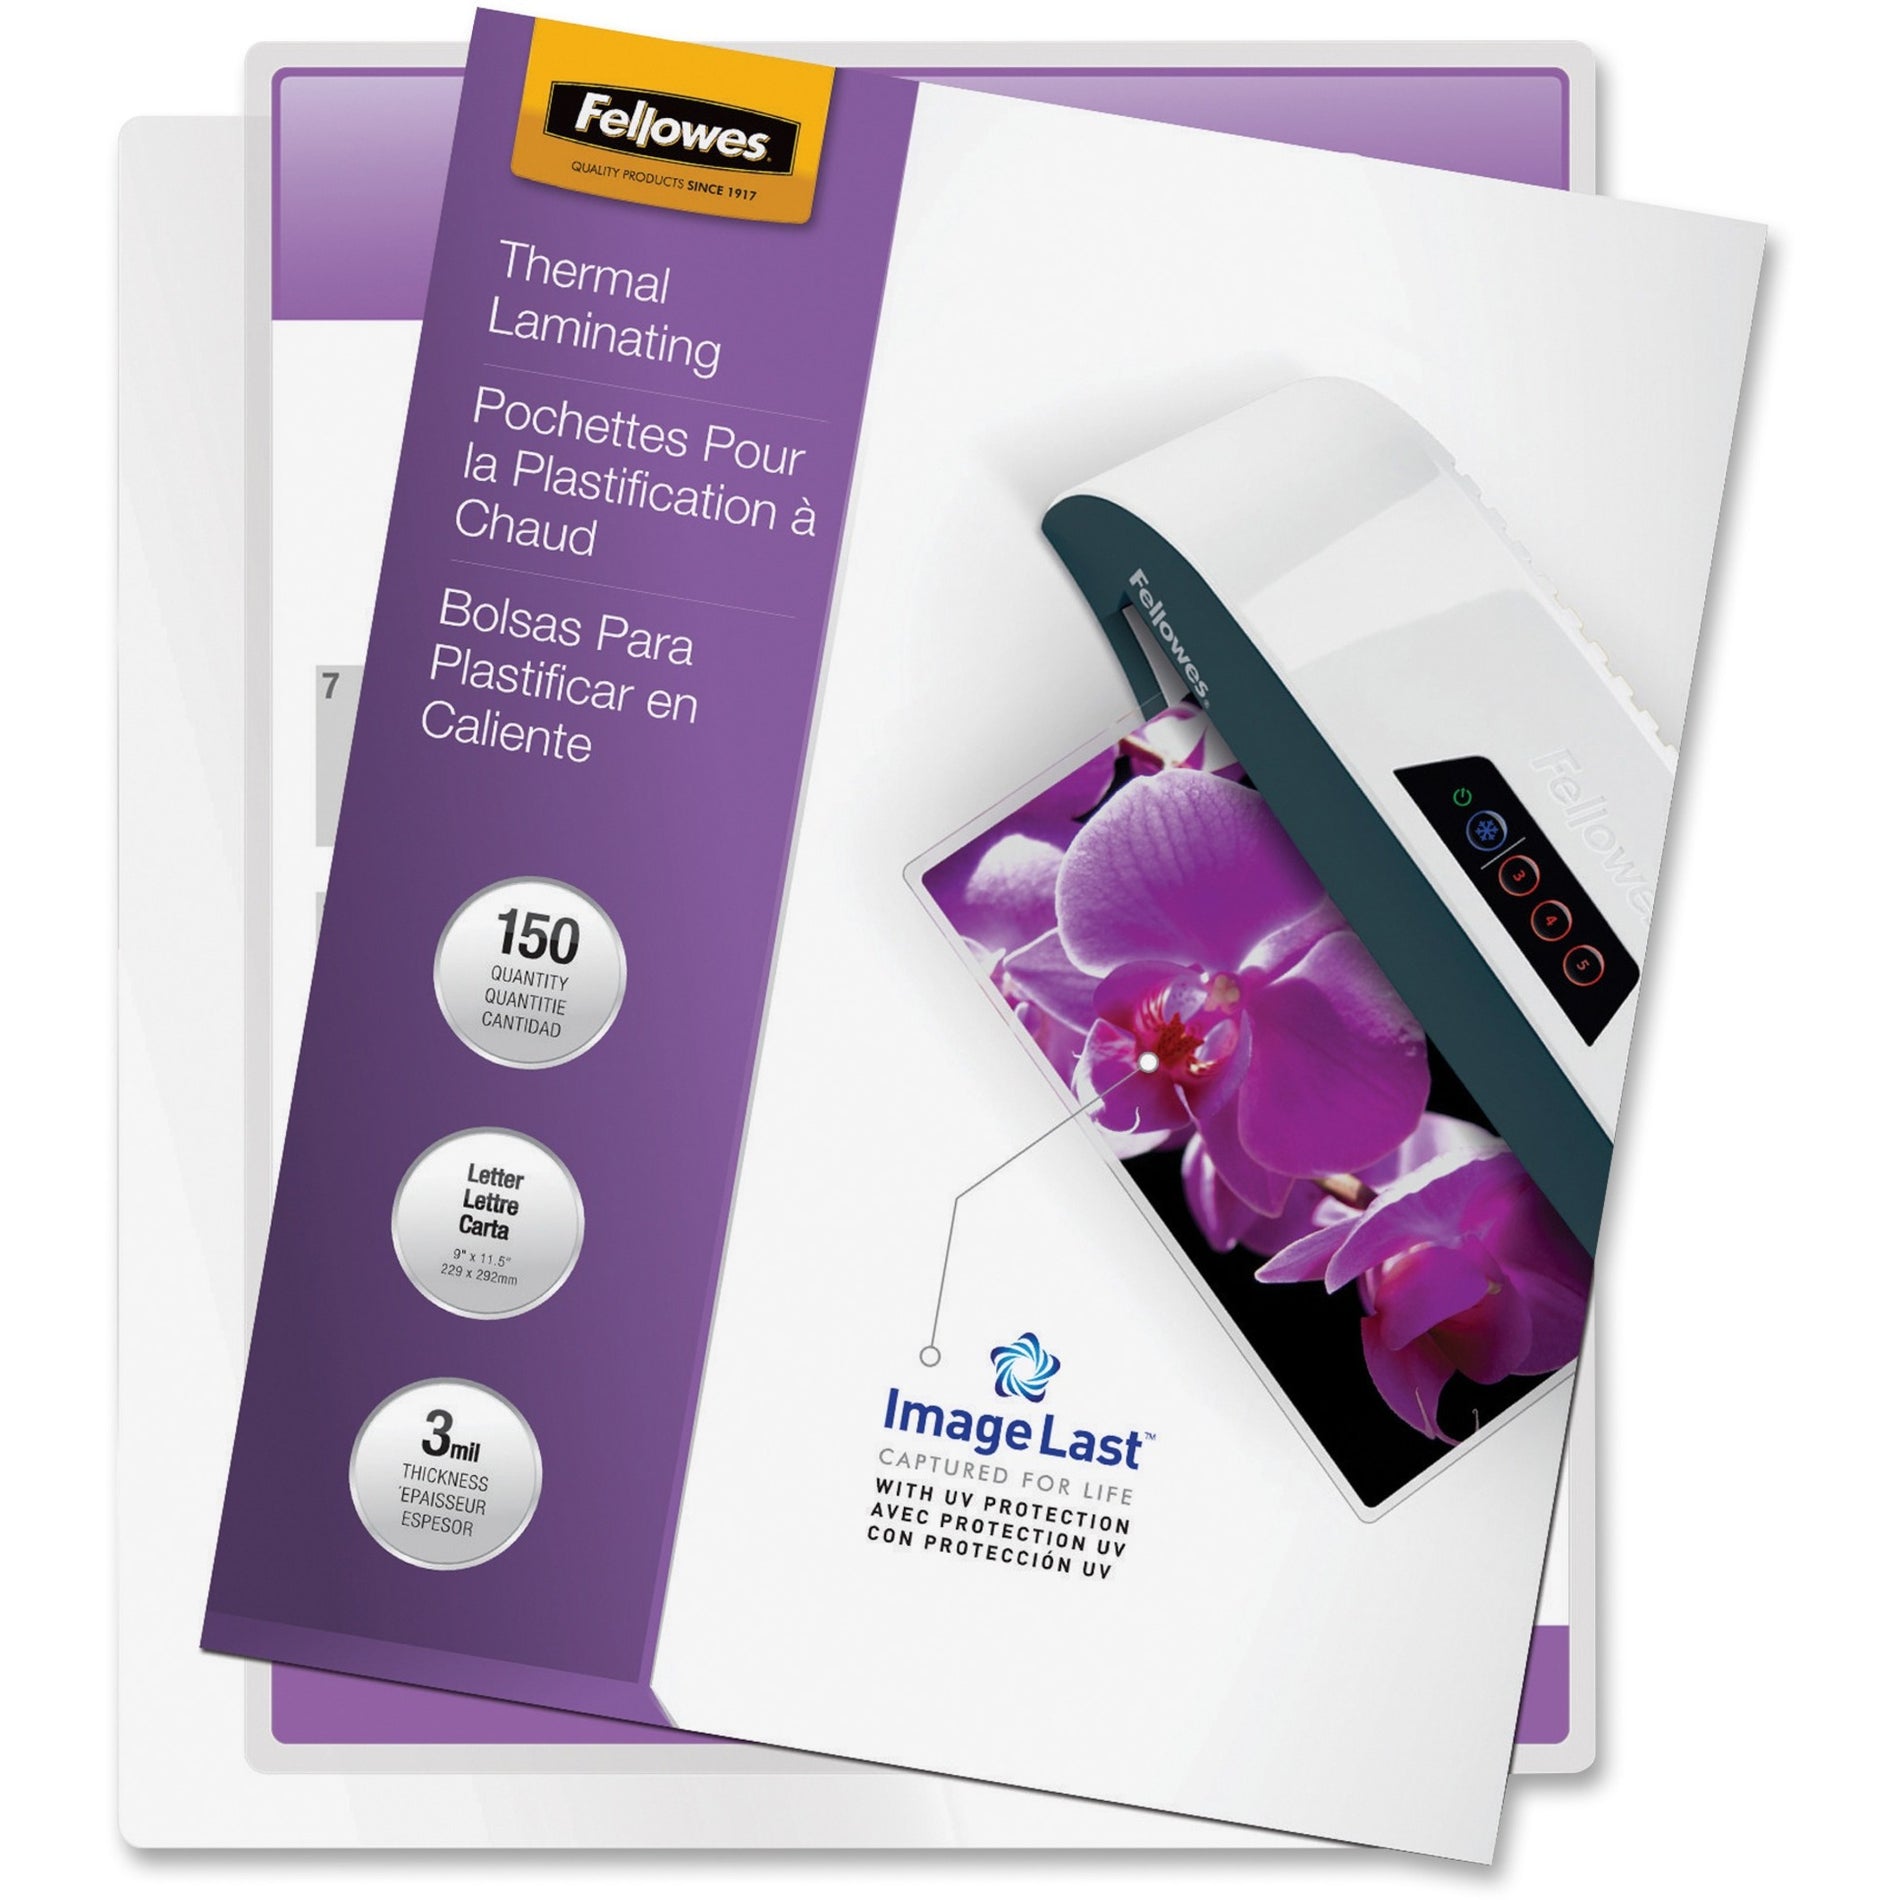 Fellowes 5200509 ImageLast Jam-Free Premium Thermal Laminating Pouches, 3 mil, 9"x11-1/2", 150/PK, Clear